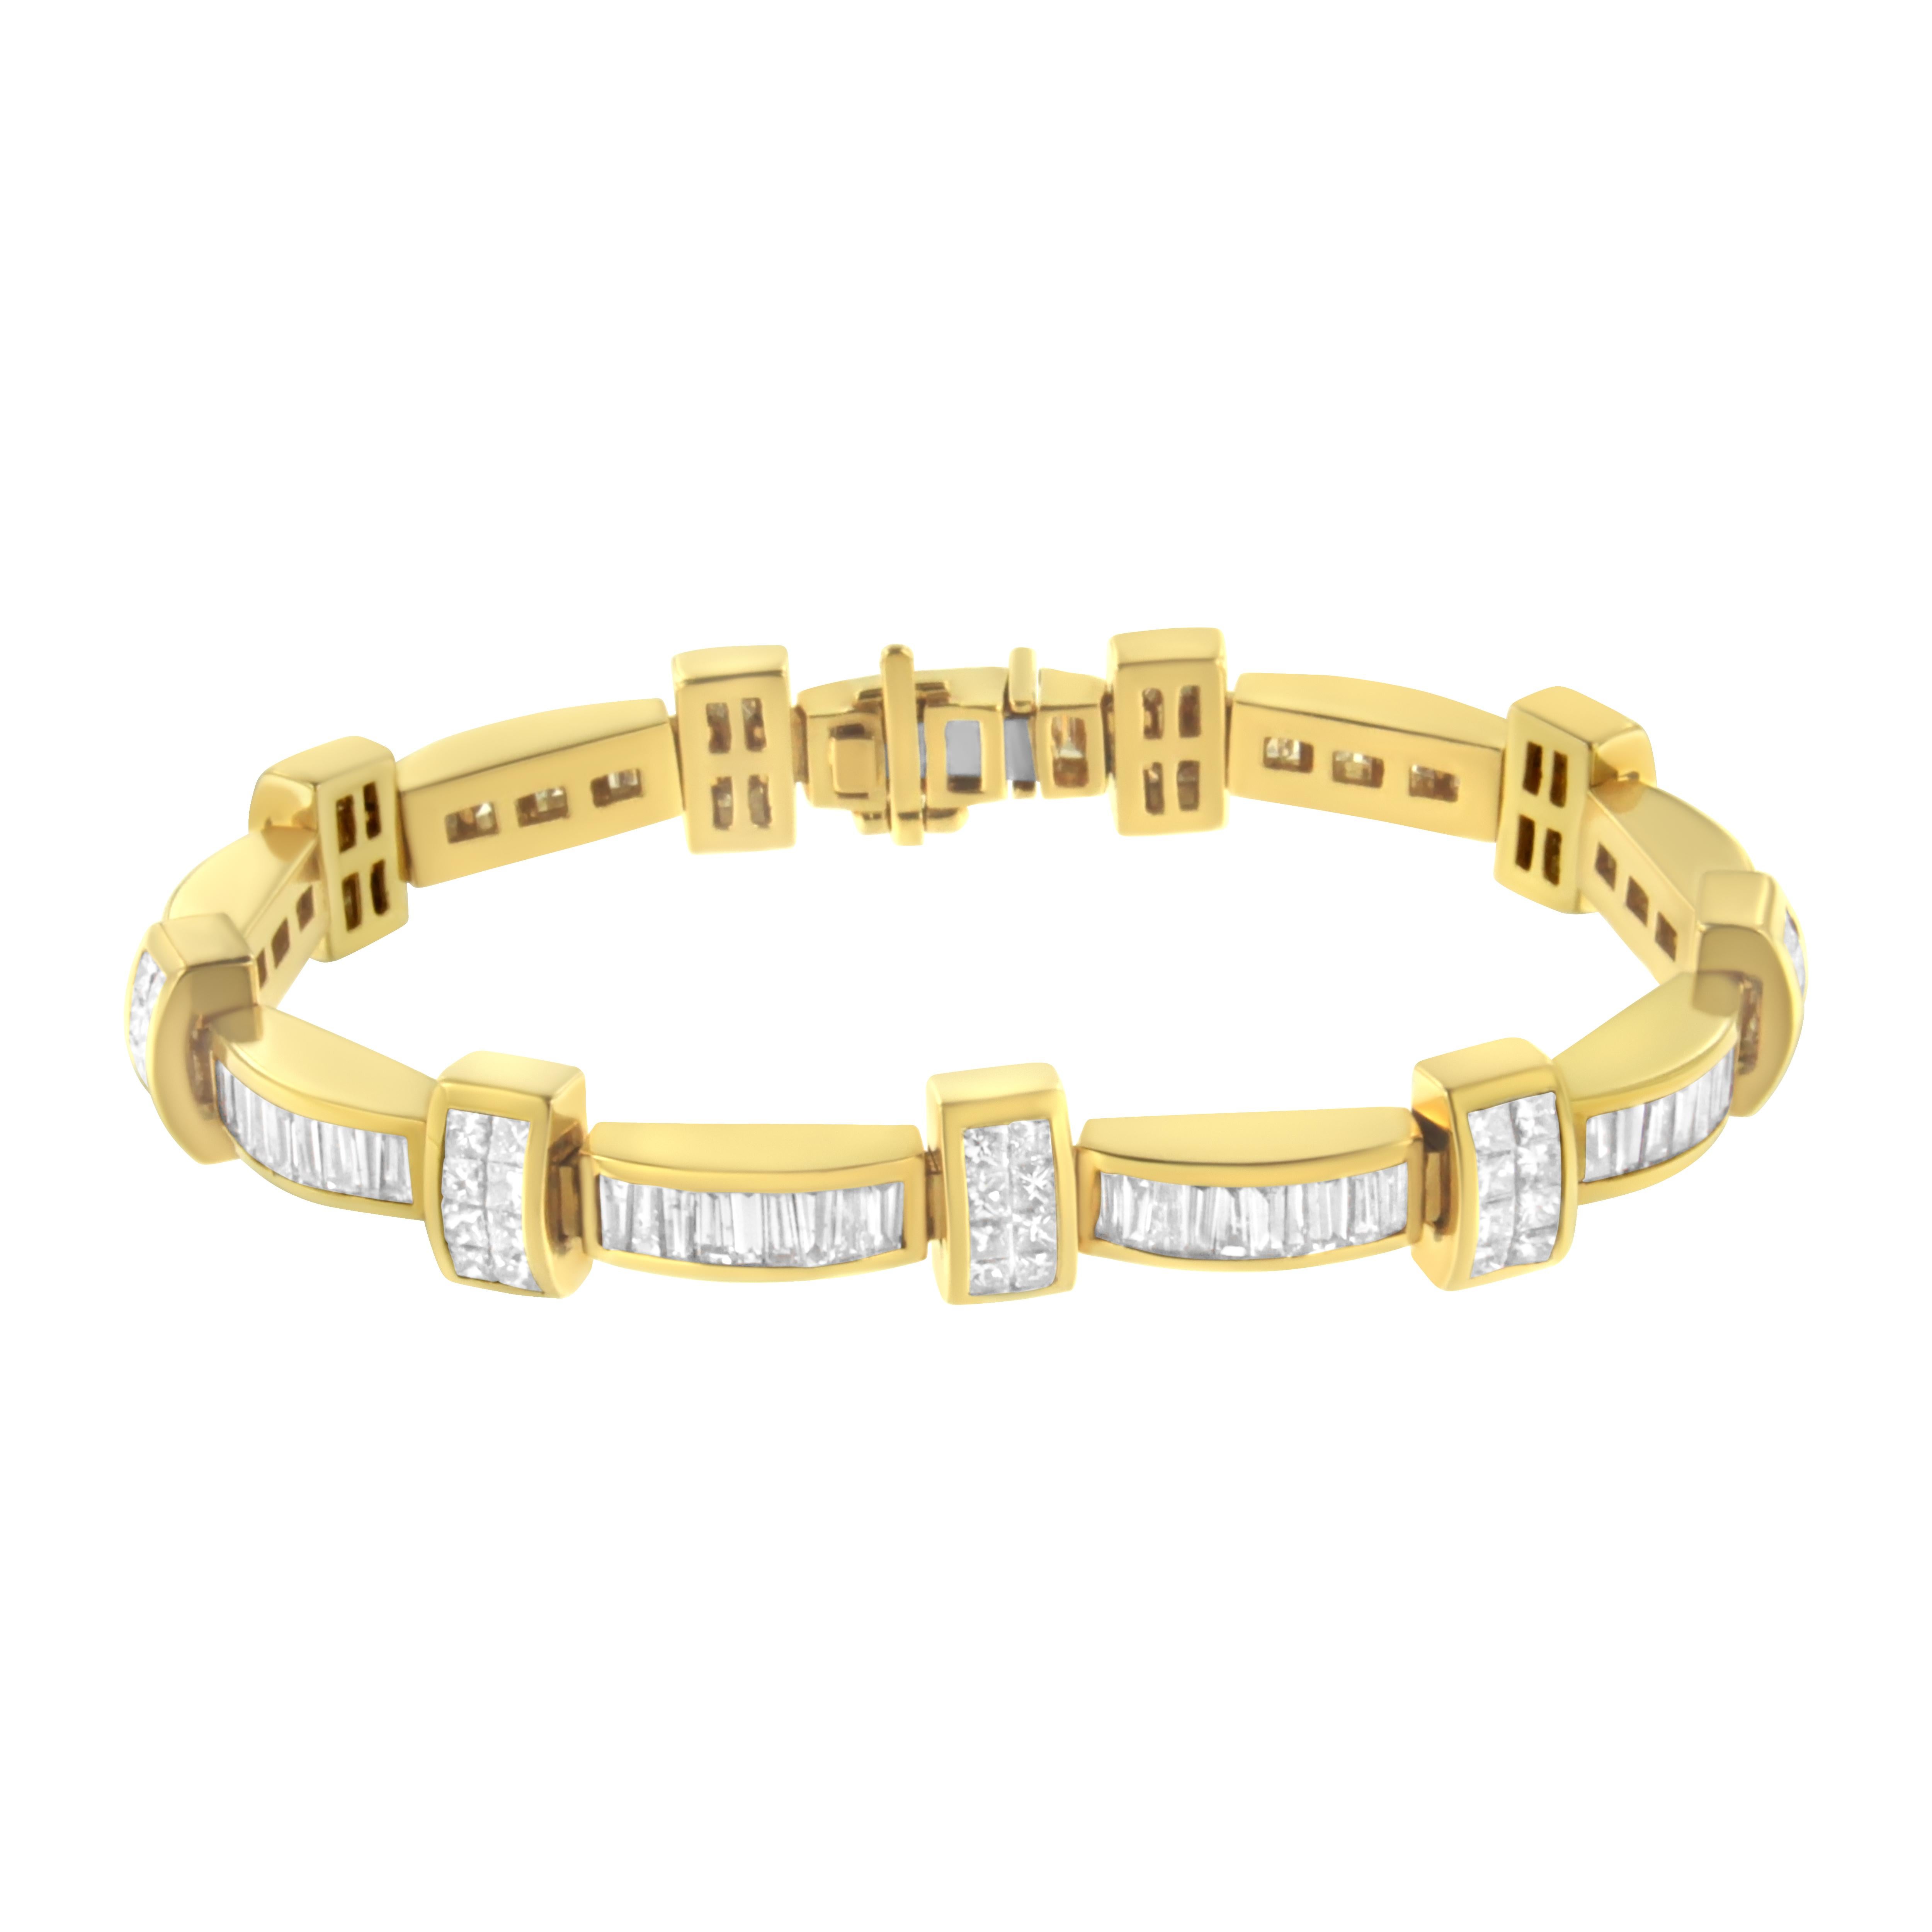 Combining the shine of 18 karat yellow gold and the sparkle of over 7 carats of diamonds, this chic bracelet makes a dramatic style statement, with connecting bands of princess cut and baguette stones all around.

